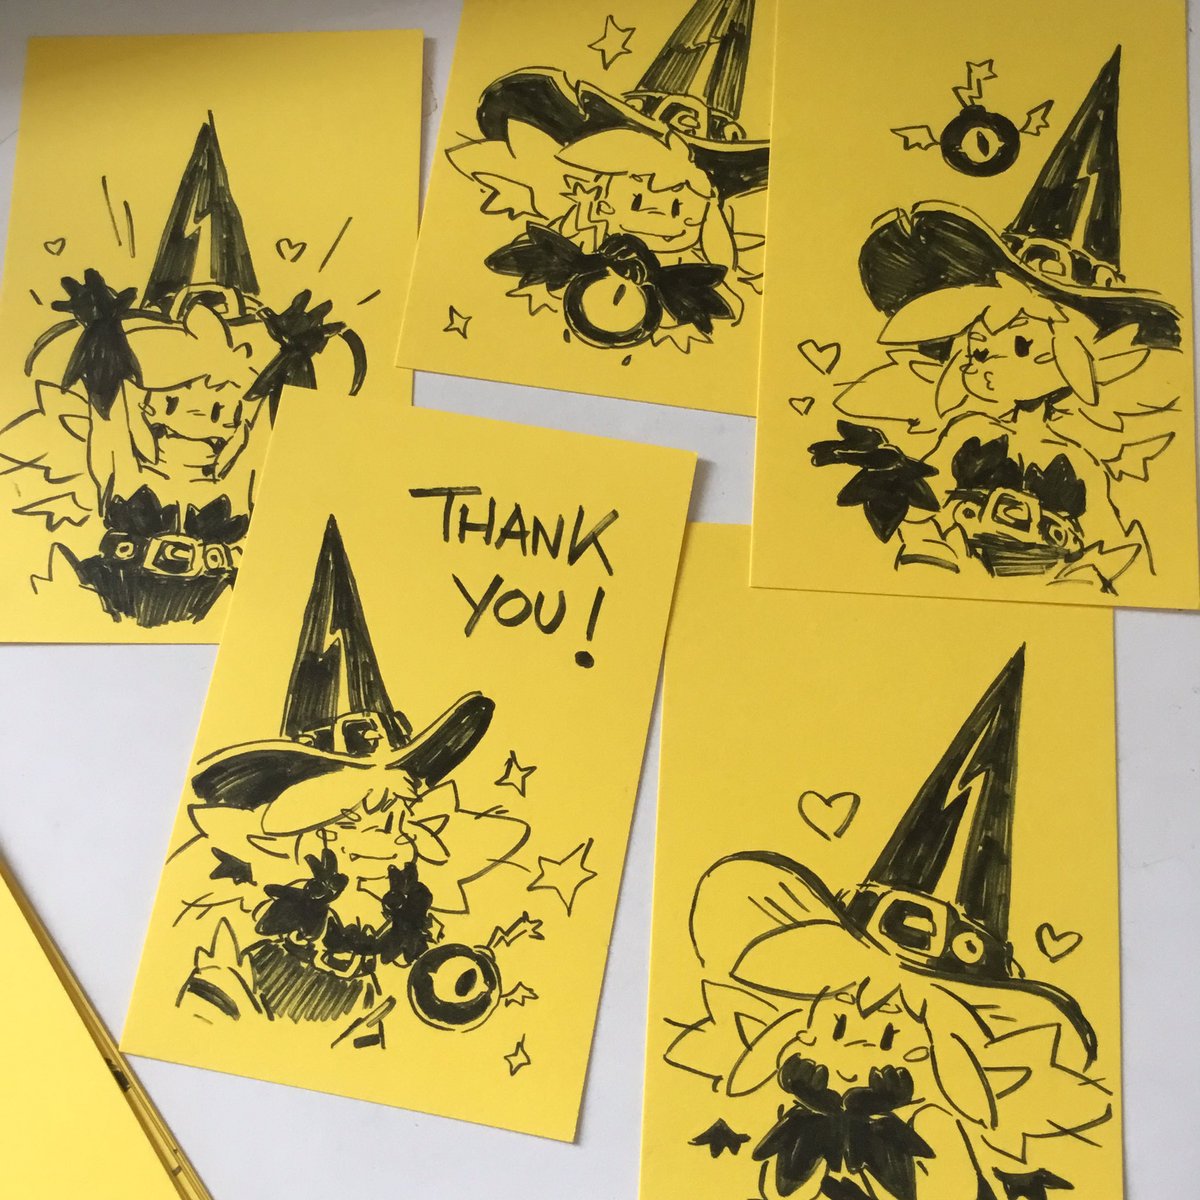 Making lil thank u cards to go with each order hehe 